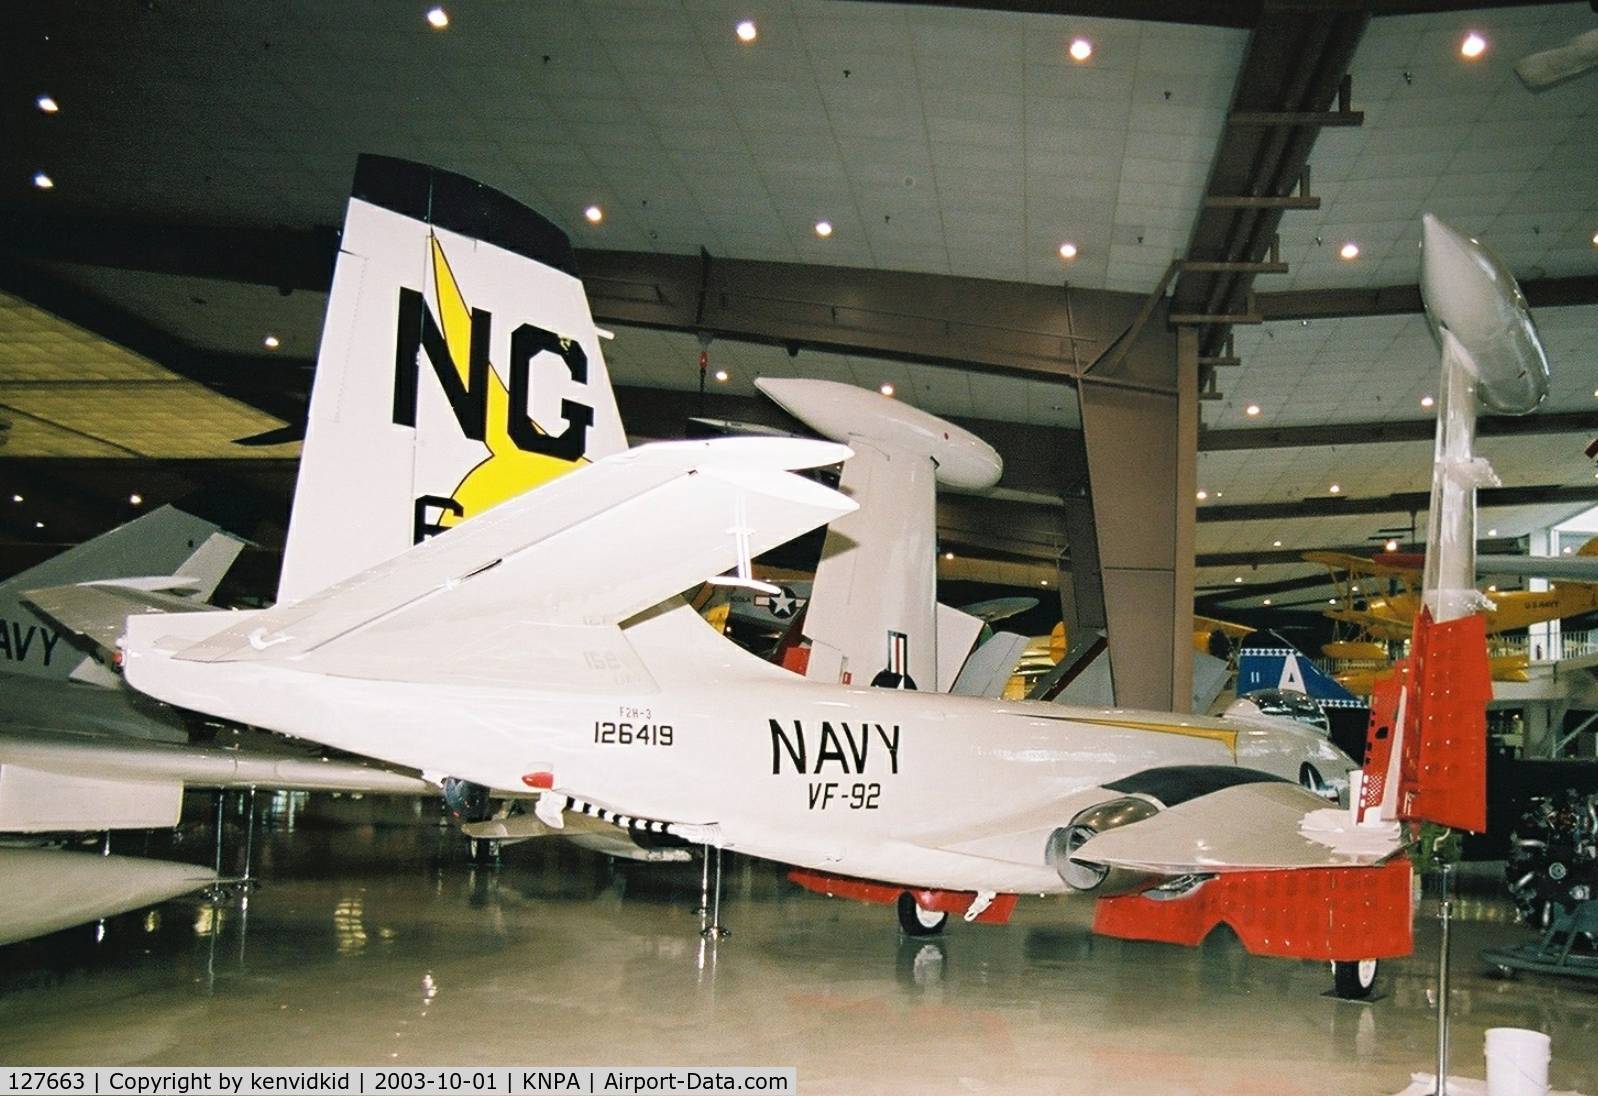 127663, McDonnell F2H-4/F-2D Banshee C/N 250, On display at the Museum of Naval Aviation, Pensacola. Painted as 124619.